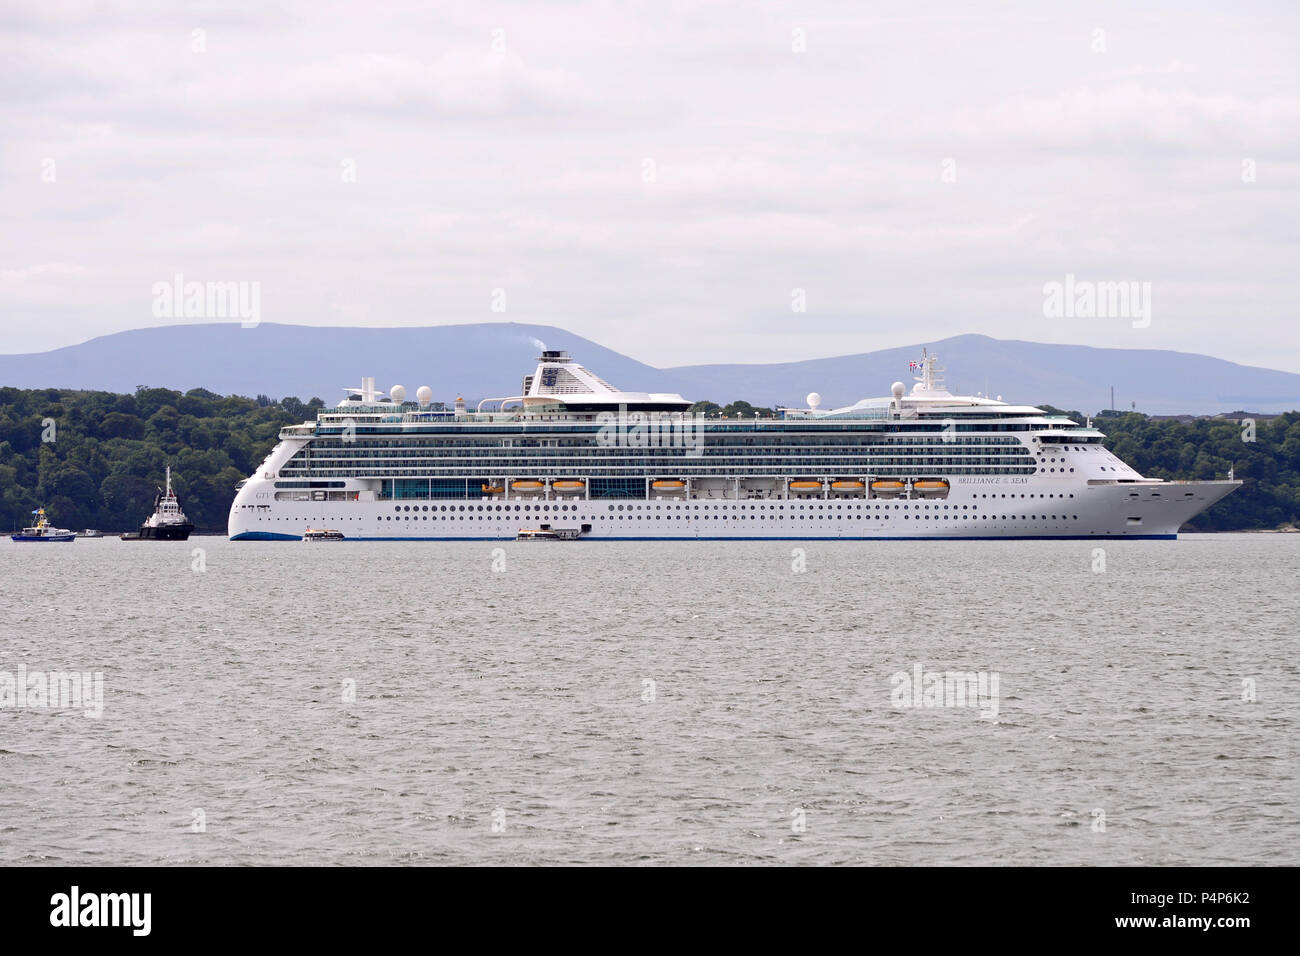 South Queensferry, Scotland, United Kingdom, 23, June, 2018. The cruise ship Brilliance of the Seas at anchor in the Firth of Forth beside the Forth bridges, © Ken Jack / Alamy Live News Stock Photo